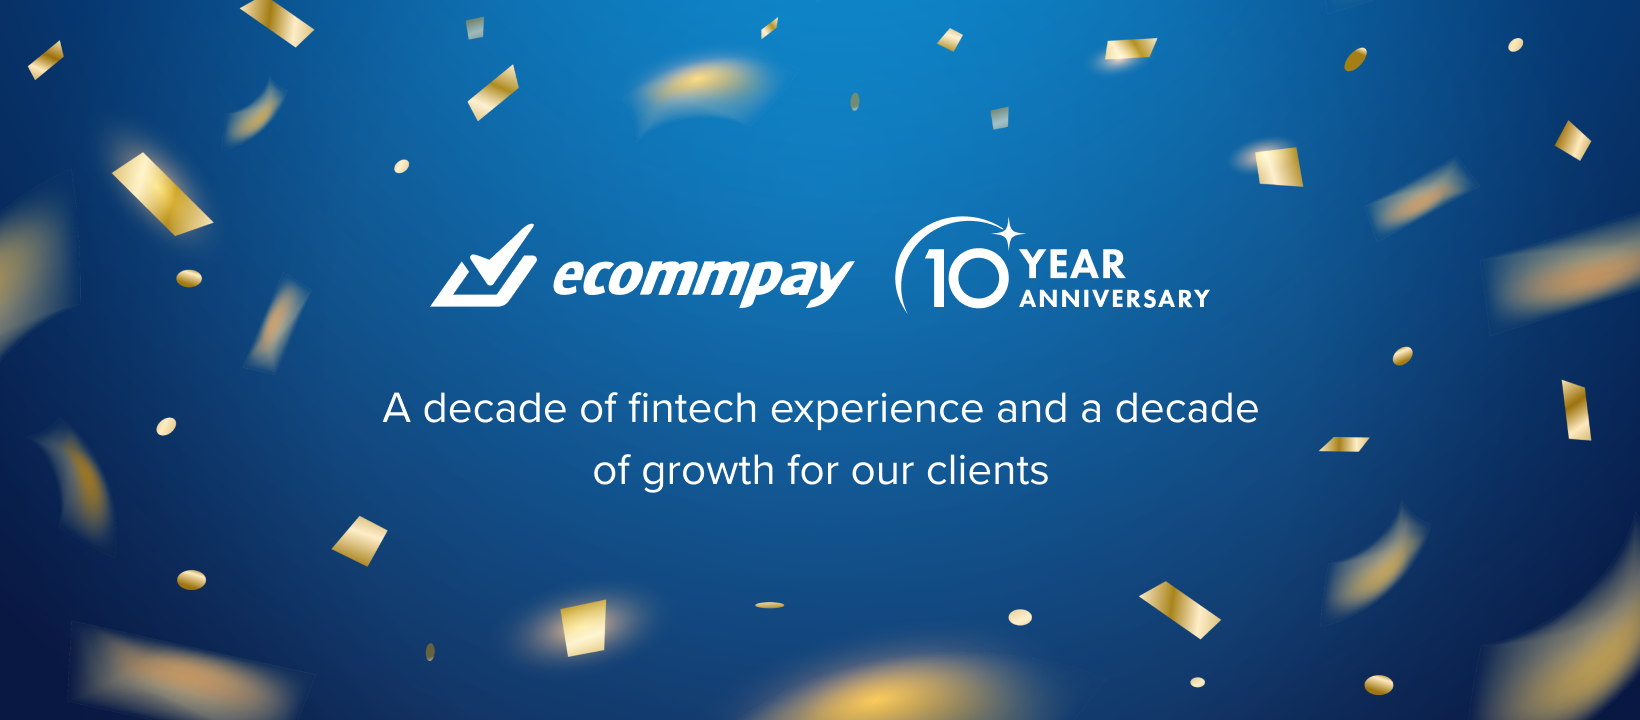 Ecommpay - Retail Technology Show